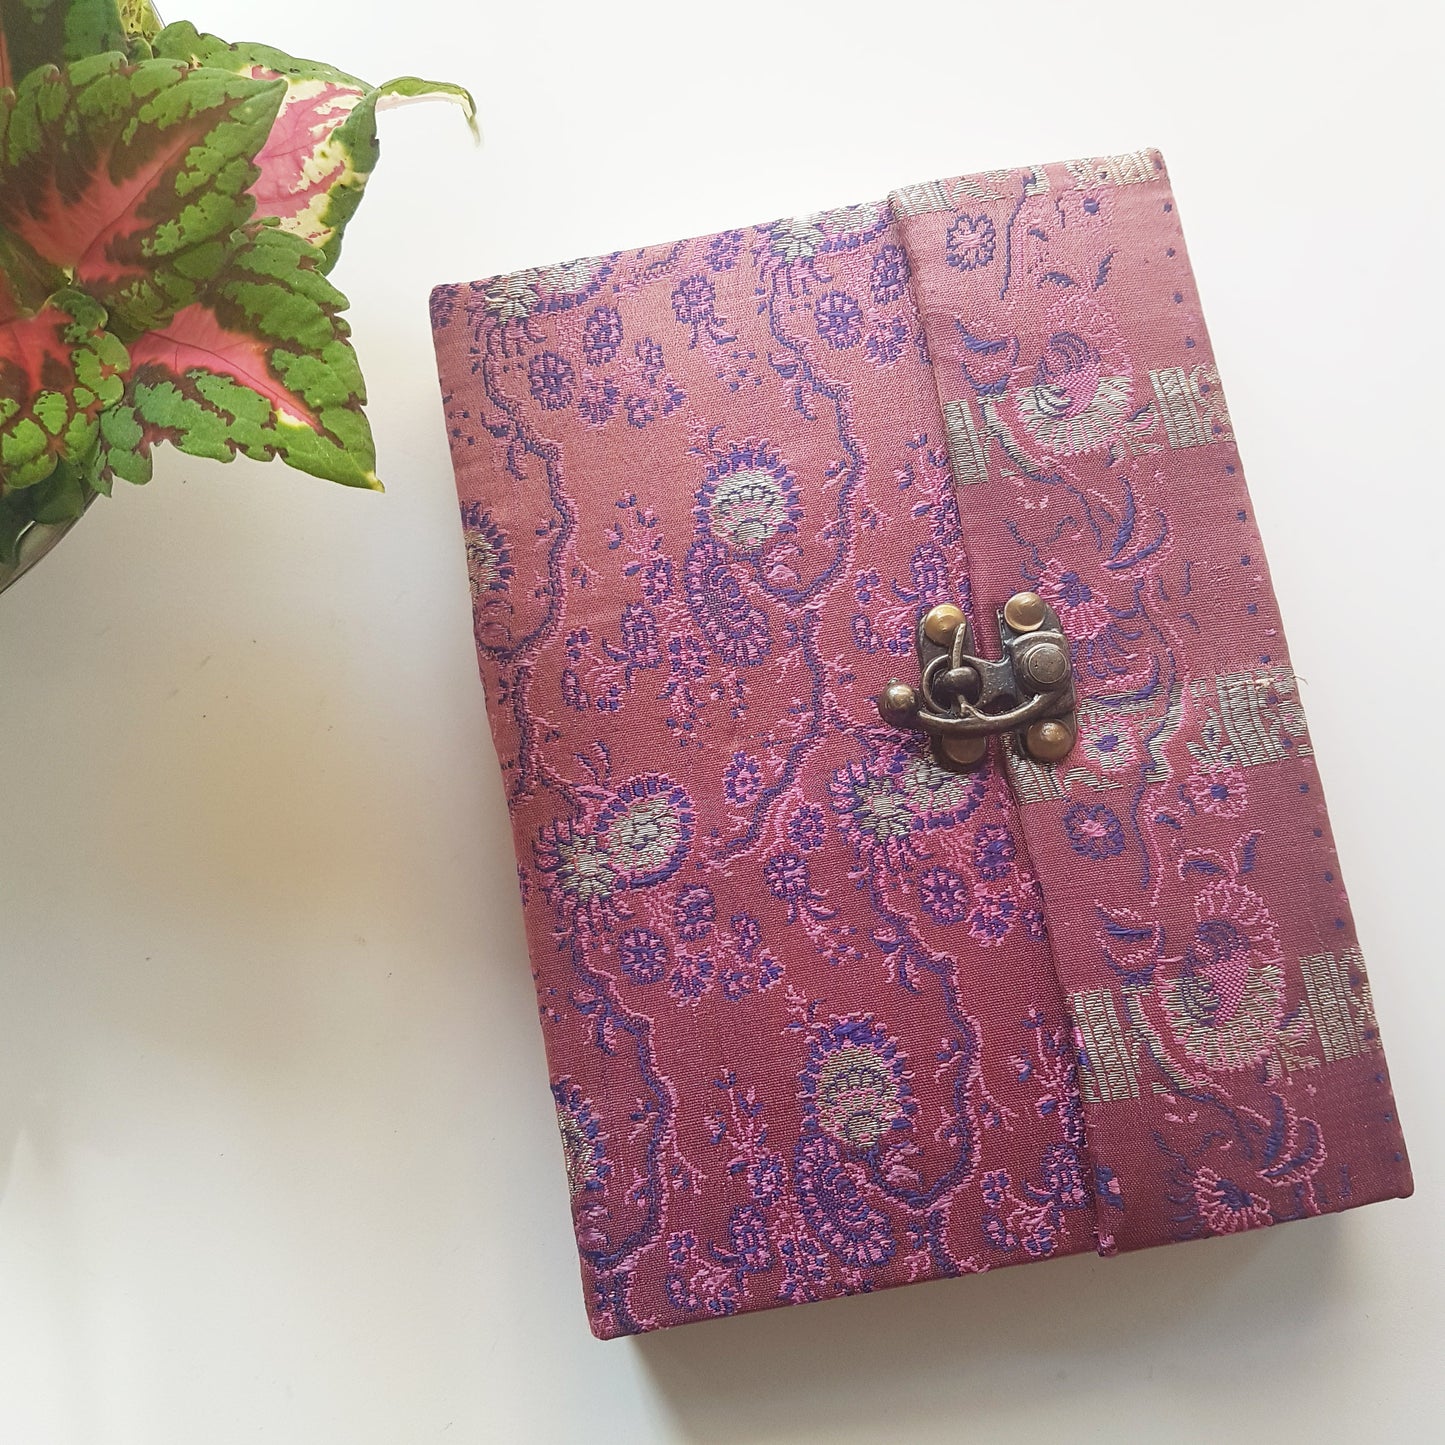 Vintage fabric sketchbook journal 5 by 7 inches. One of a kind blank book with artisan paper pages. Medieval look bronze metal lock closure.